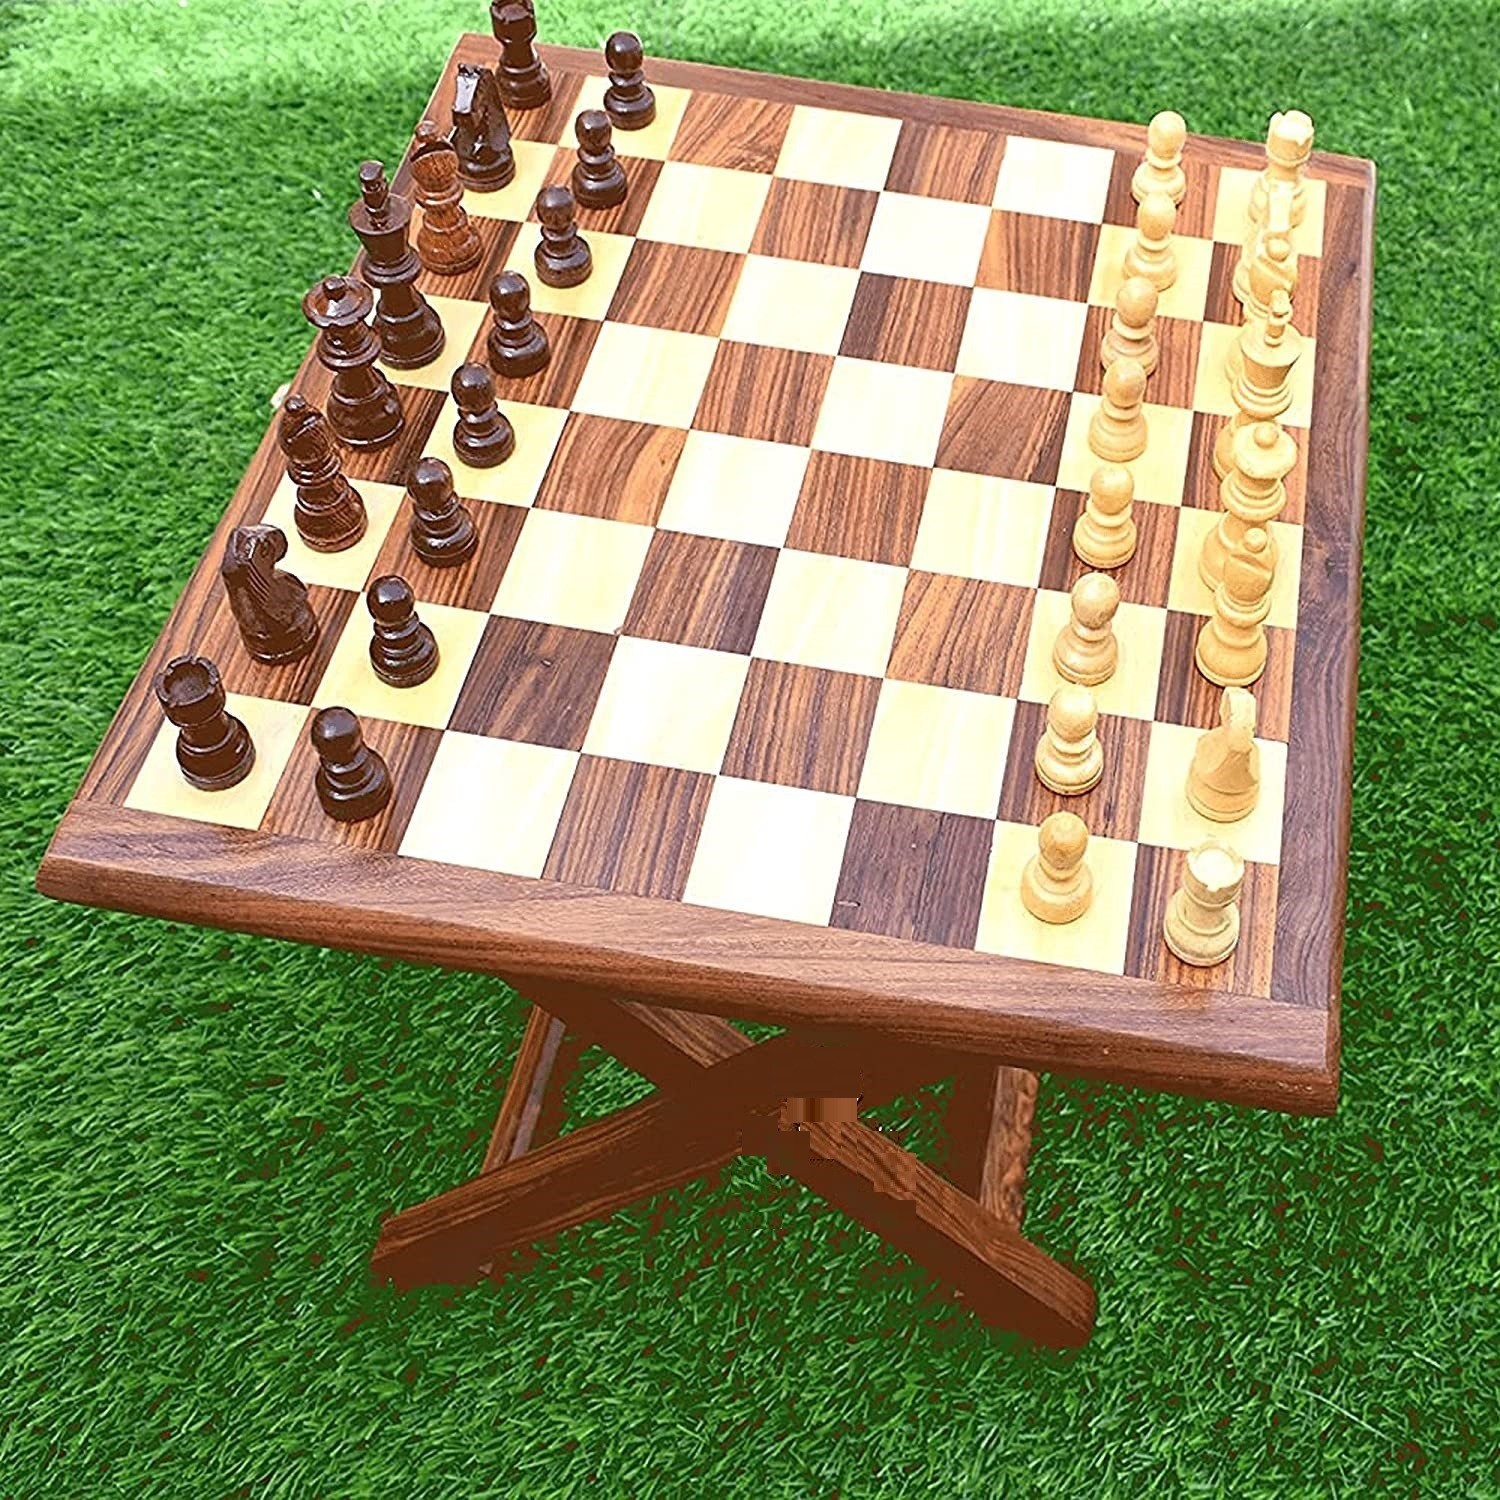 13 × 13 Chess Table Finest Work Pure Rosewood & Maple Wood Chess Board Set Table for Picnic/Garden